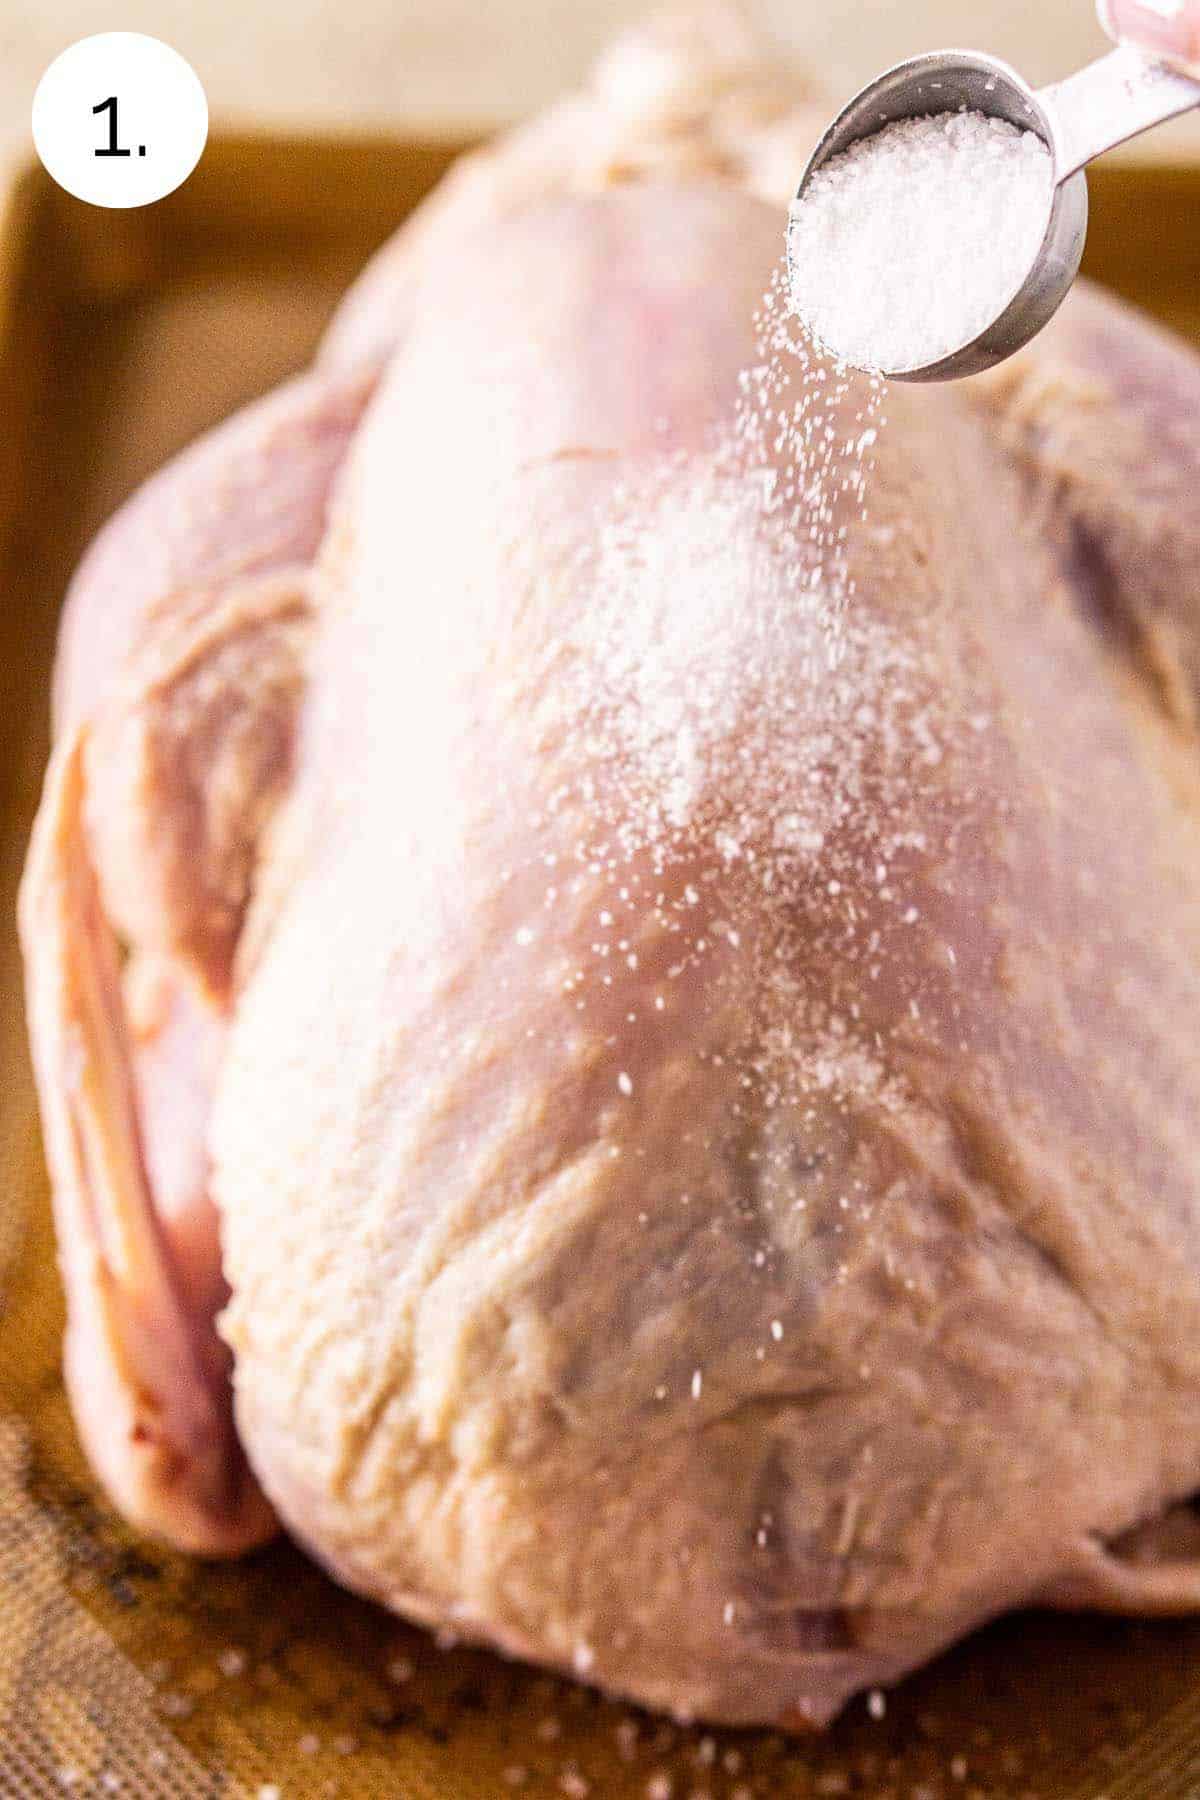 A hand shaking a tablespoon full of kosher salt all over the turkey on a baking sheet to dry brine.